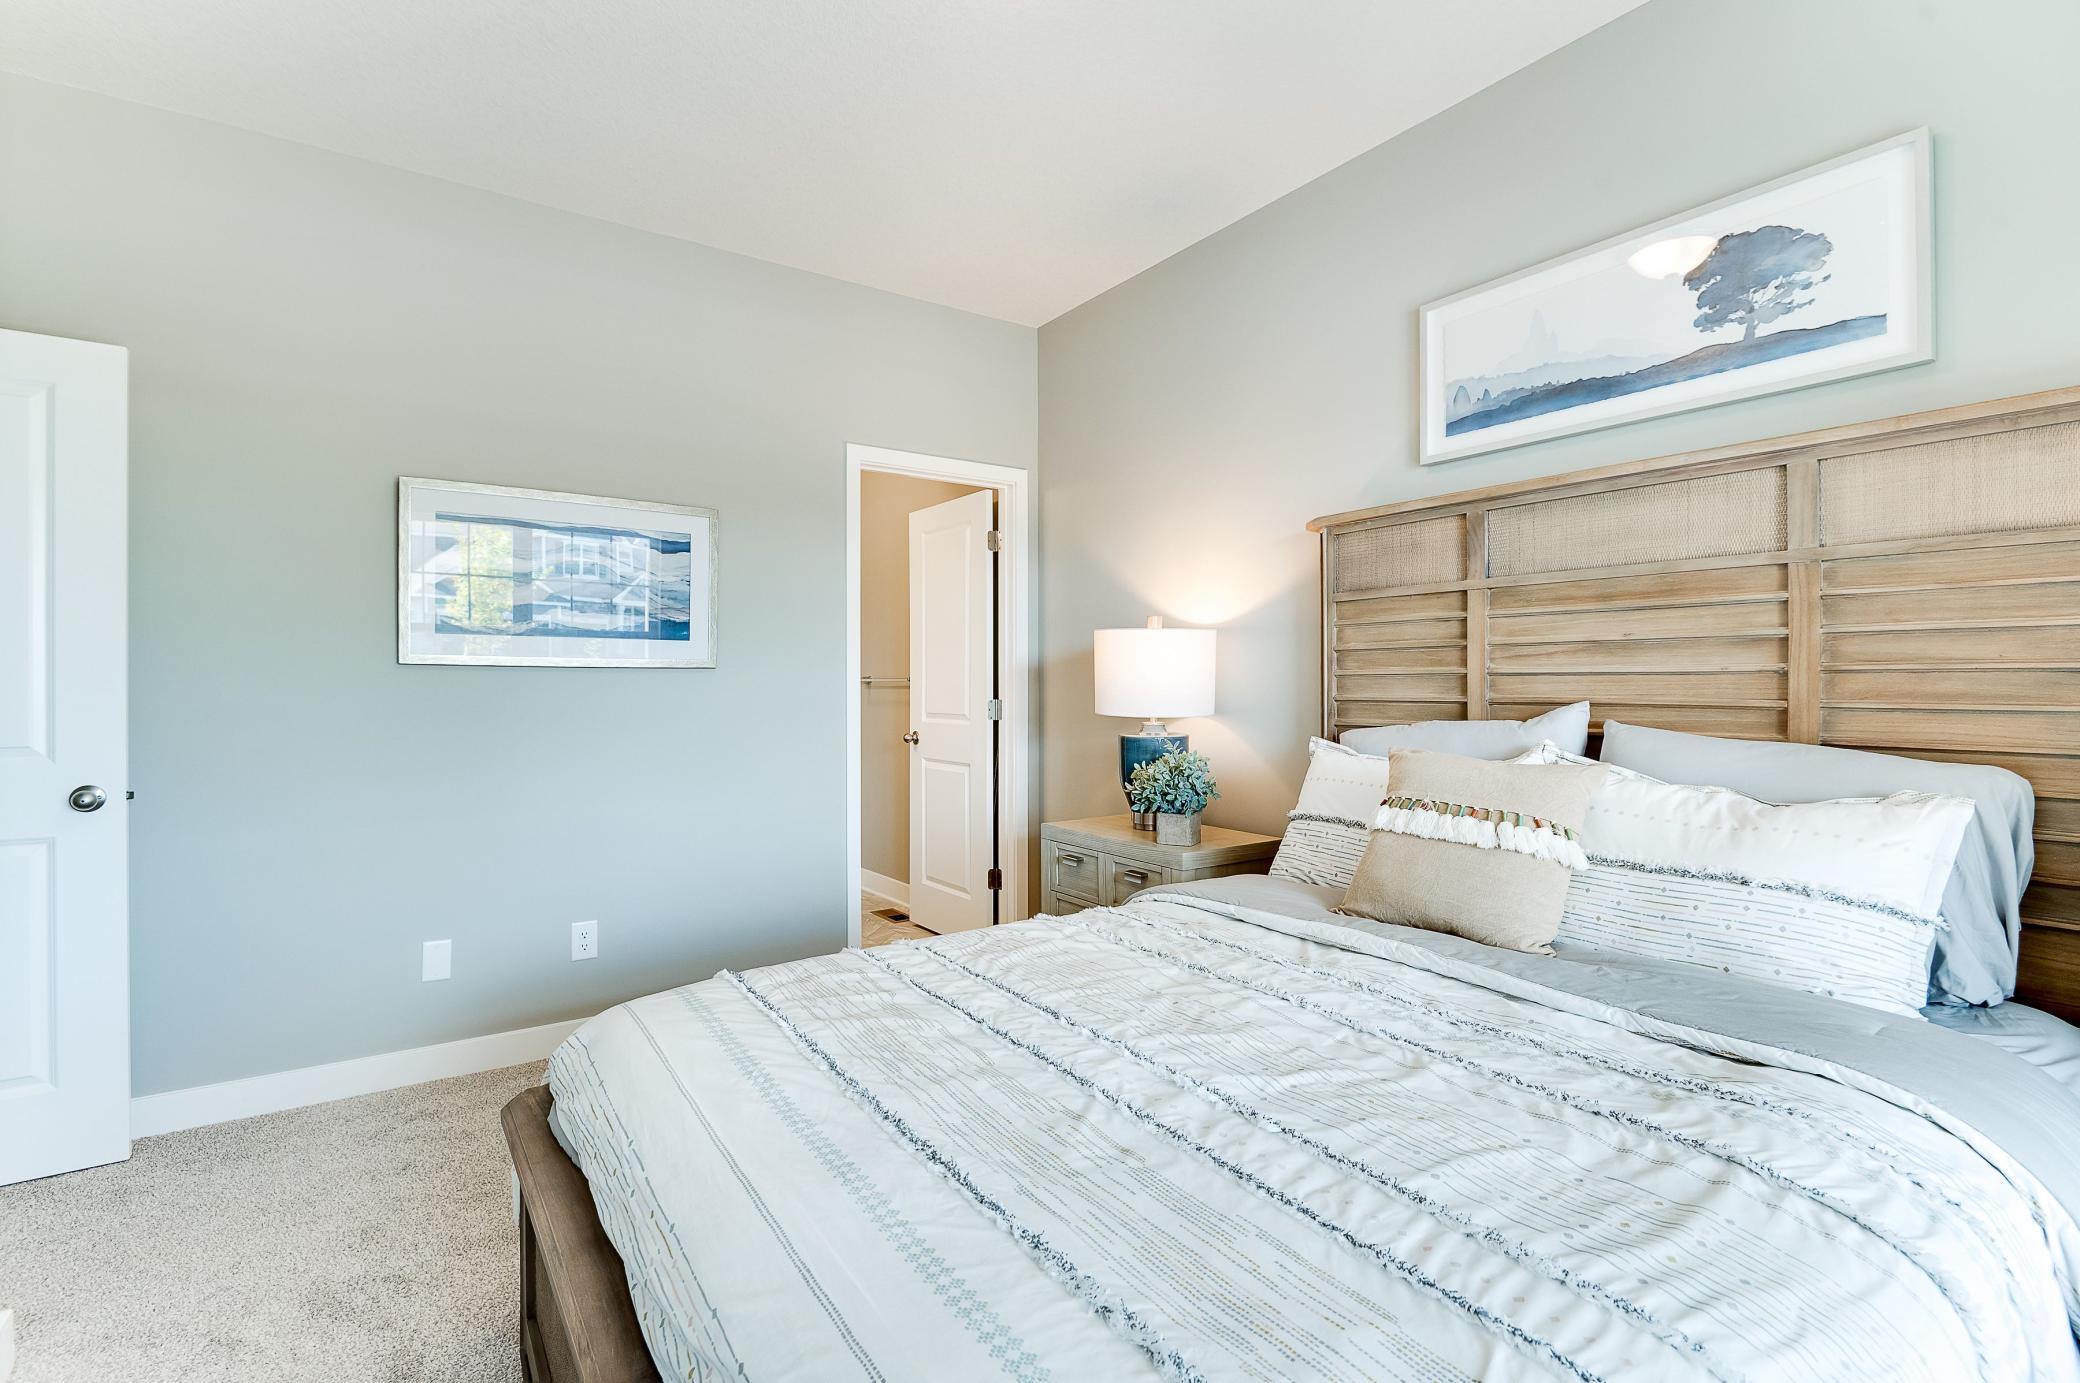 A guest room or perhaps the main level room with ensuite bath would be ideal for a home office. Photo of model home, color and options will vary.